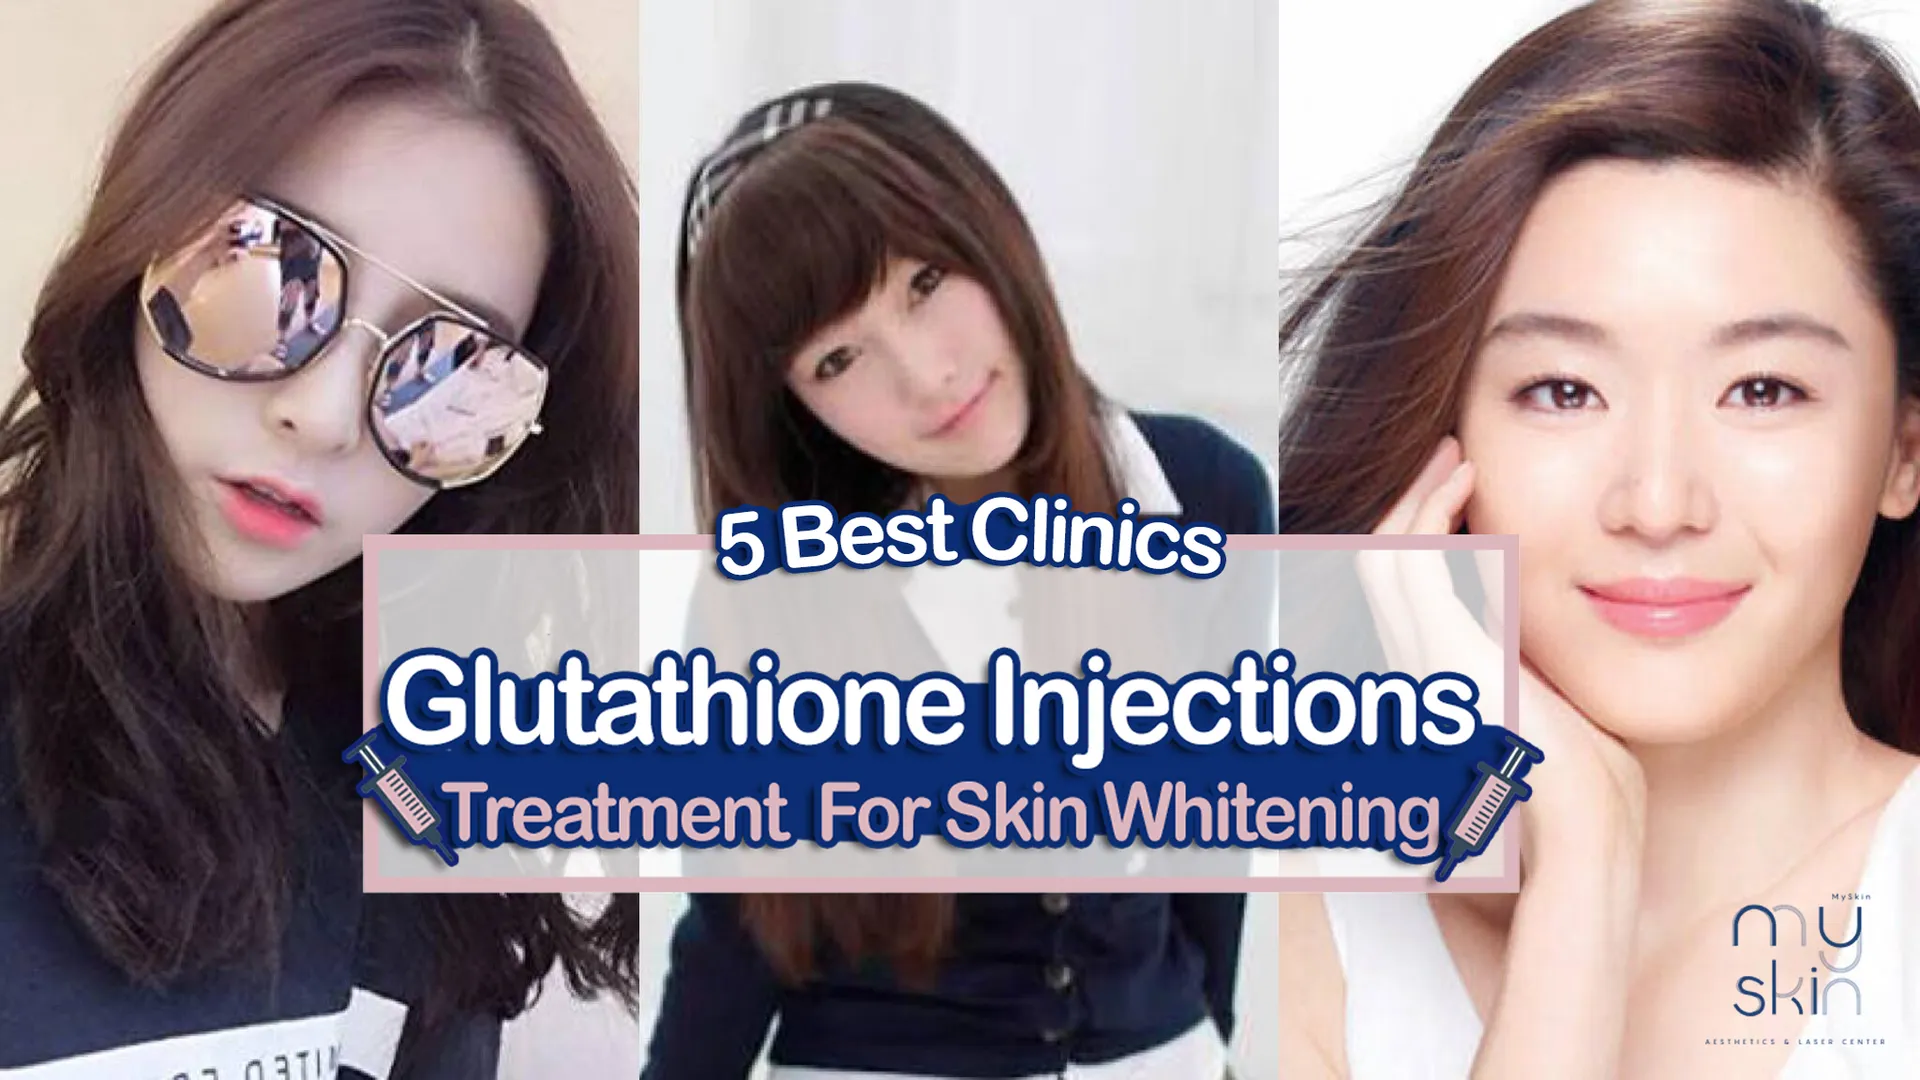 5 Best Clinics- Glutathione Injections treatment for Skin Whitening